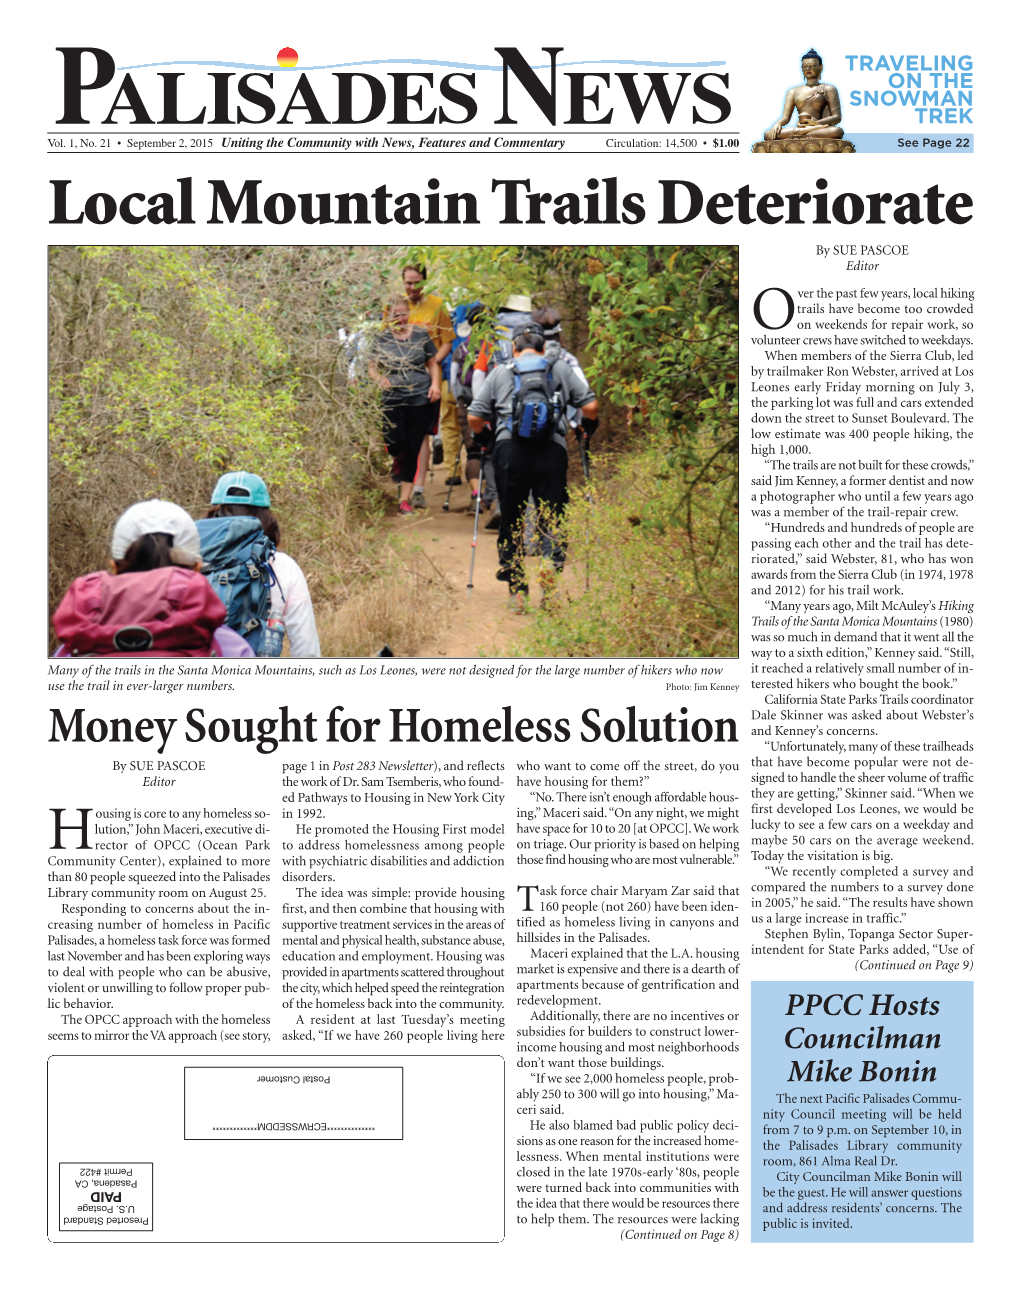 Local Mountain Trails Deteriorate